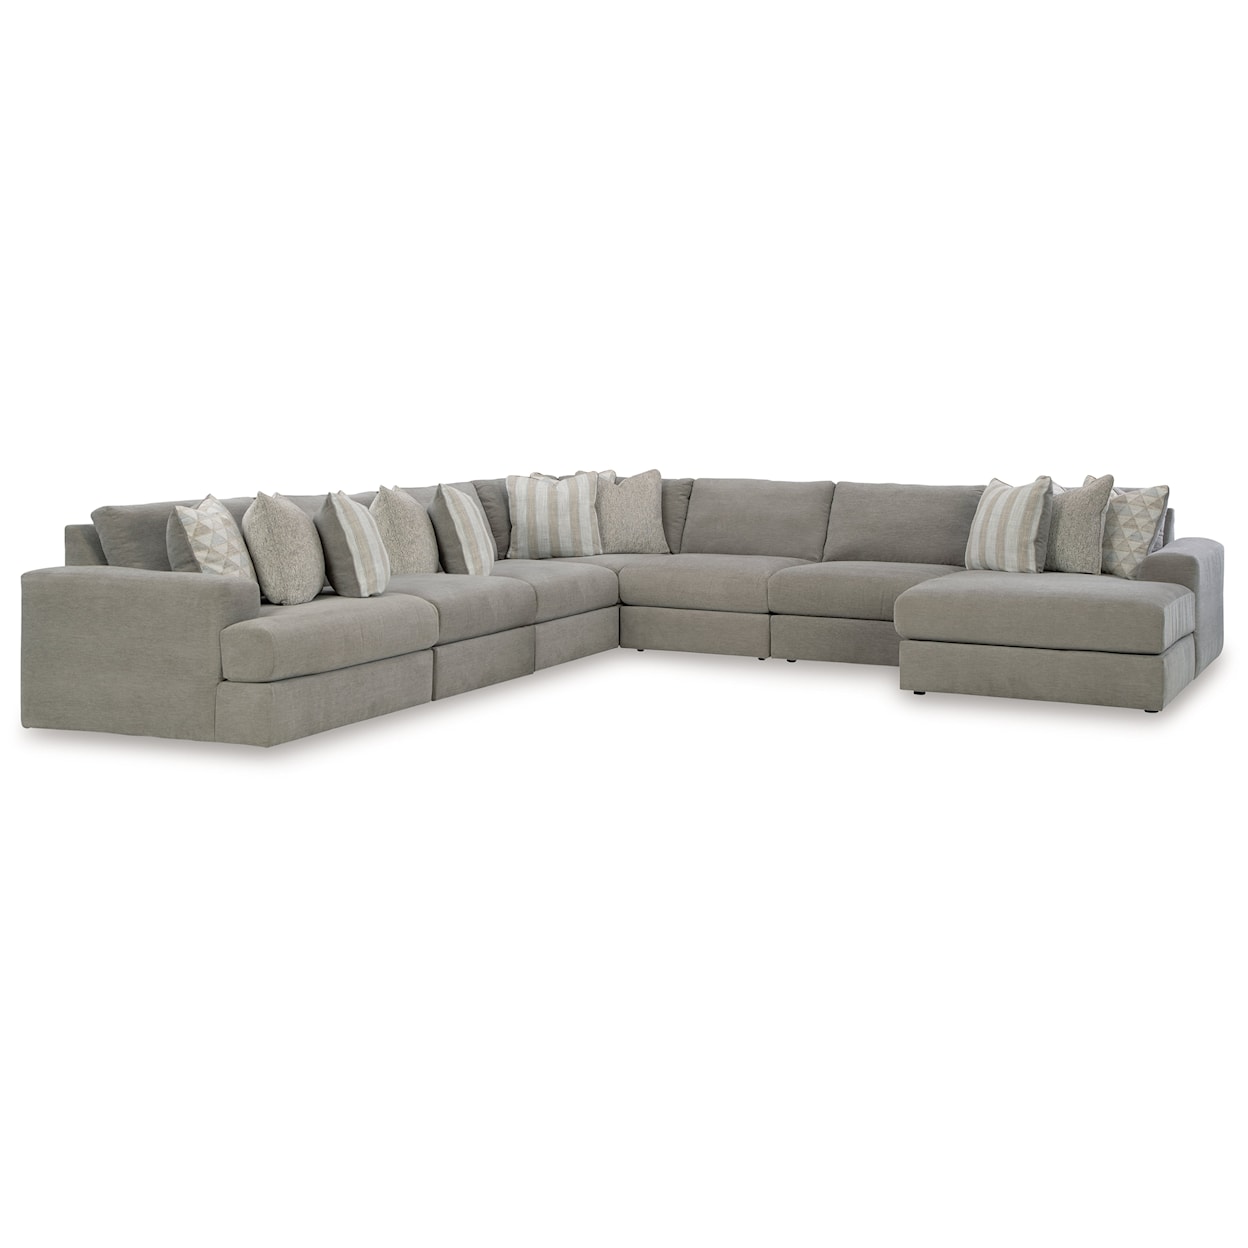 Signature Design by Ashley Furniture Avaliyah 7-Piece Sectional With Chaise